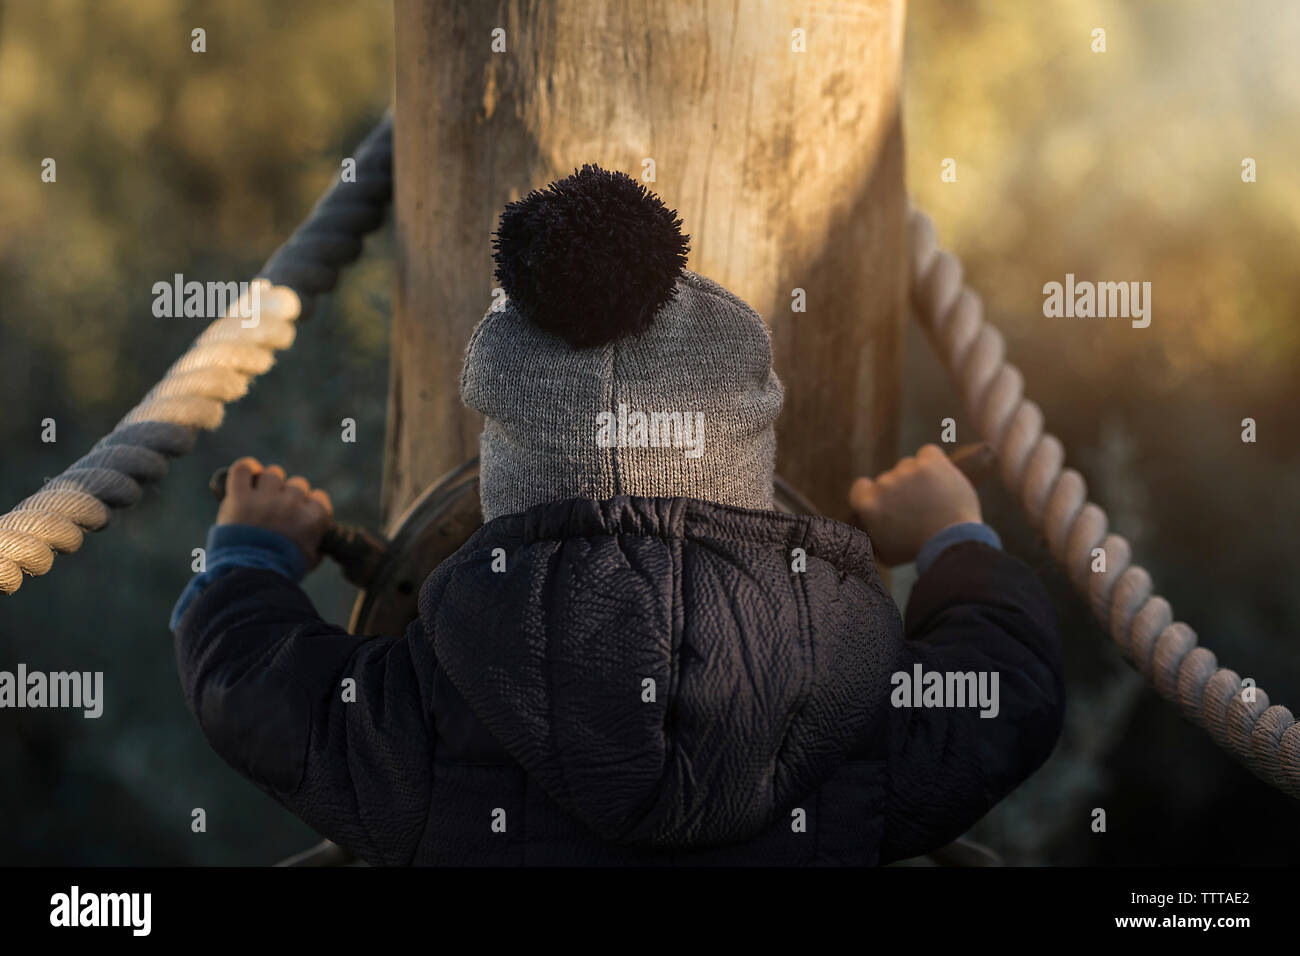 Rear view of boy in warm clothing spinning steering wheel at playground Stock Photo